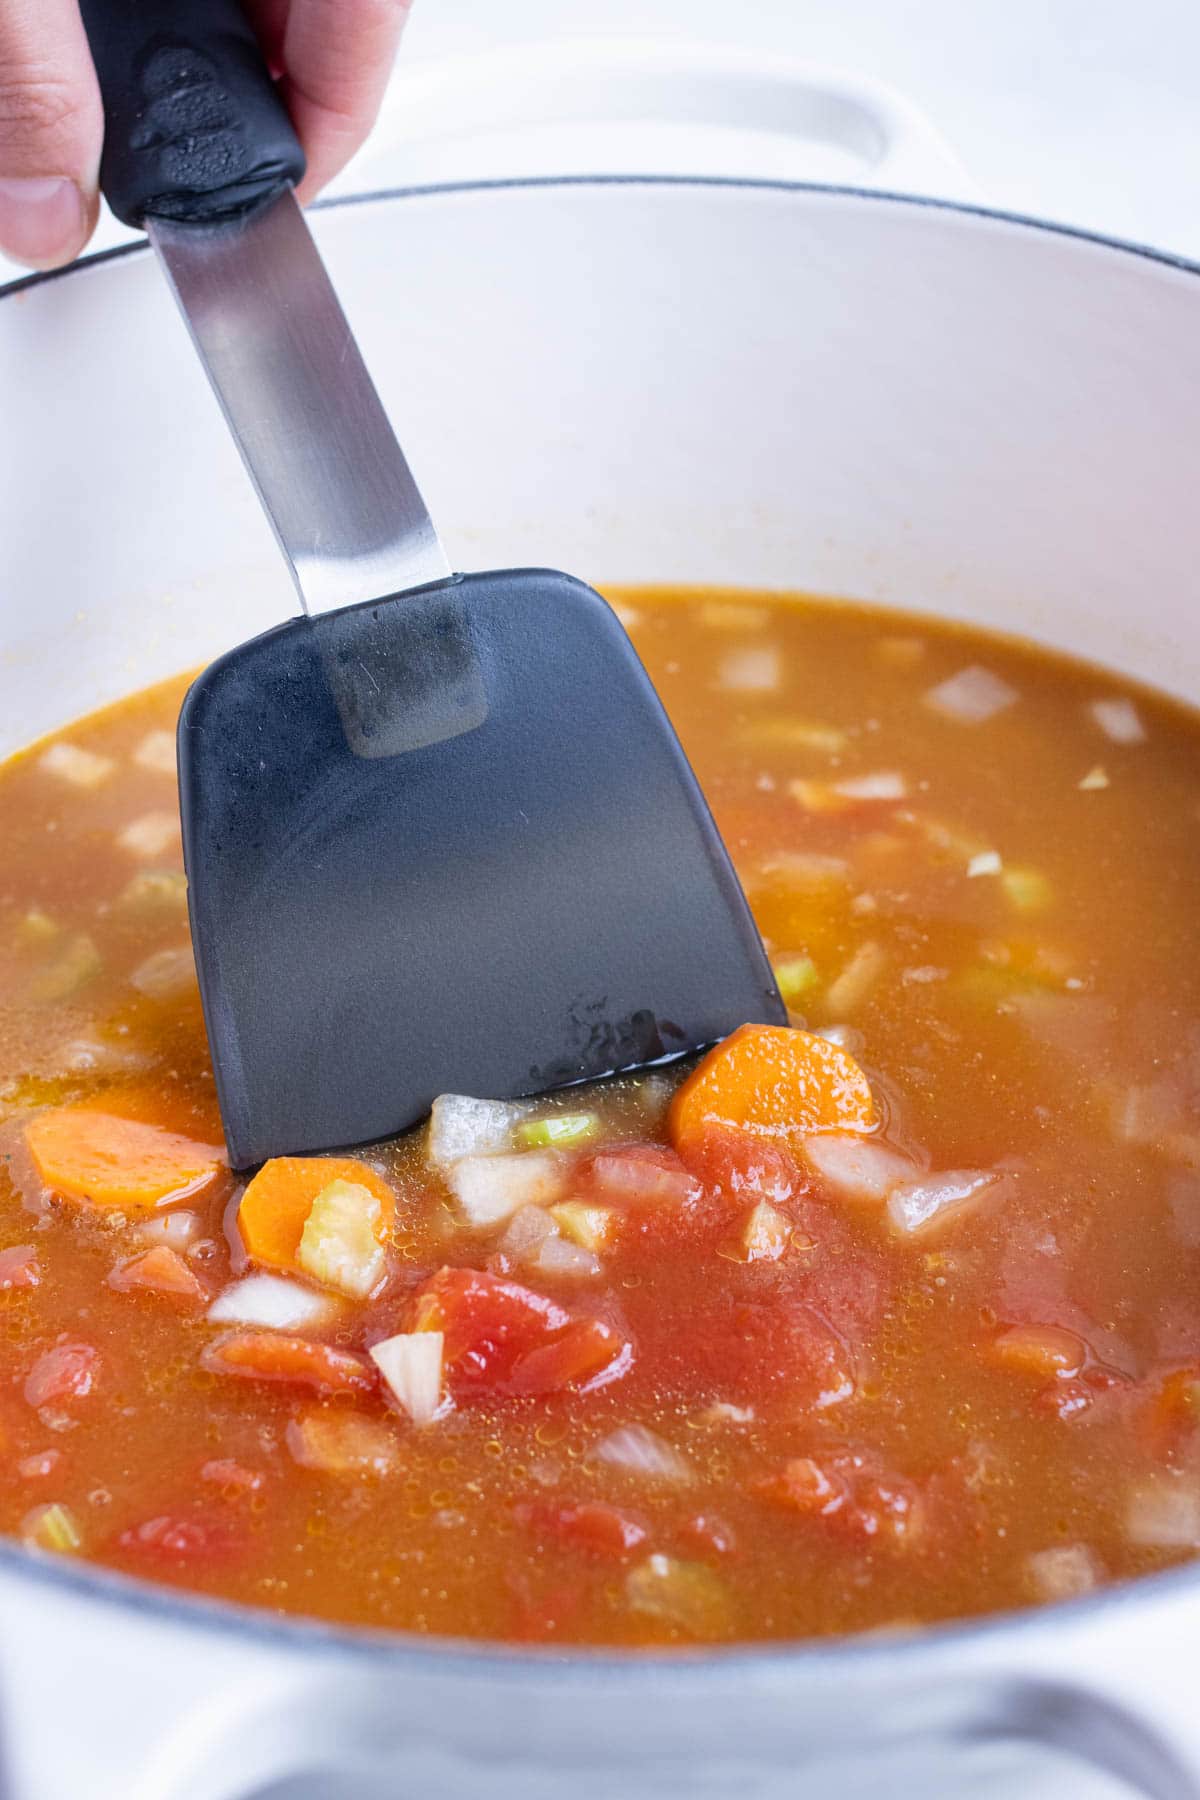 Broth and canned vegetables are added to the pot.